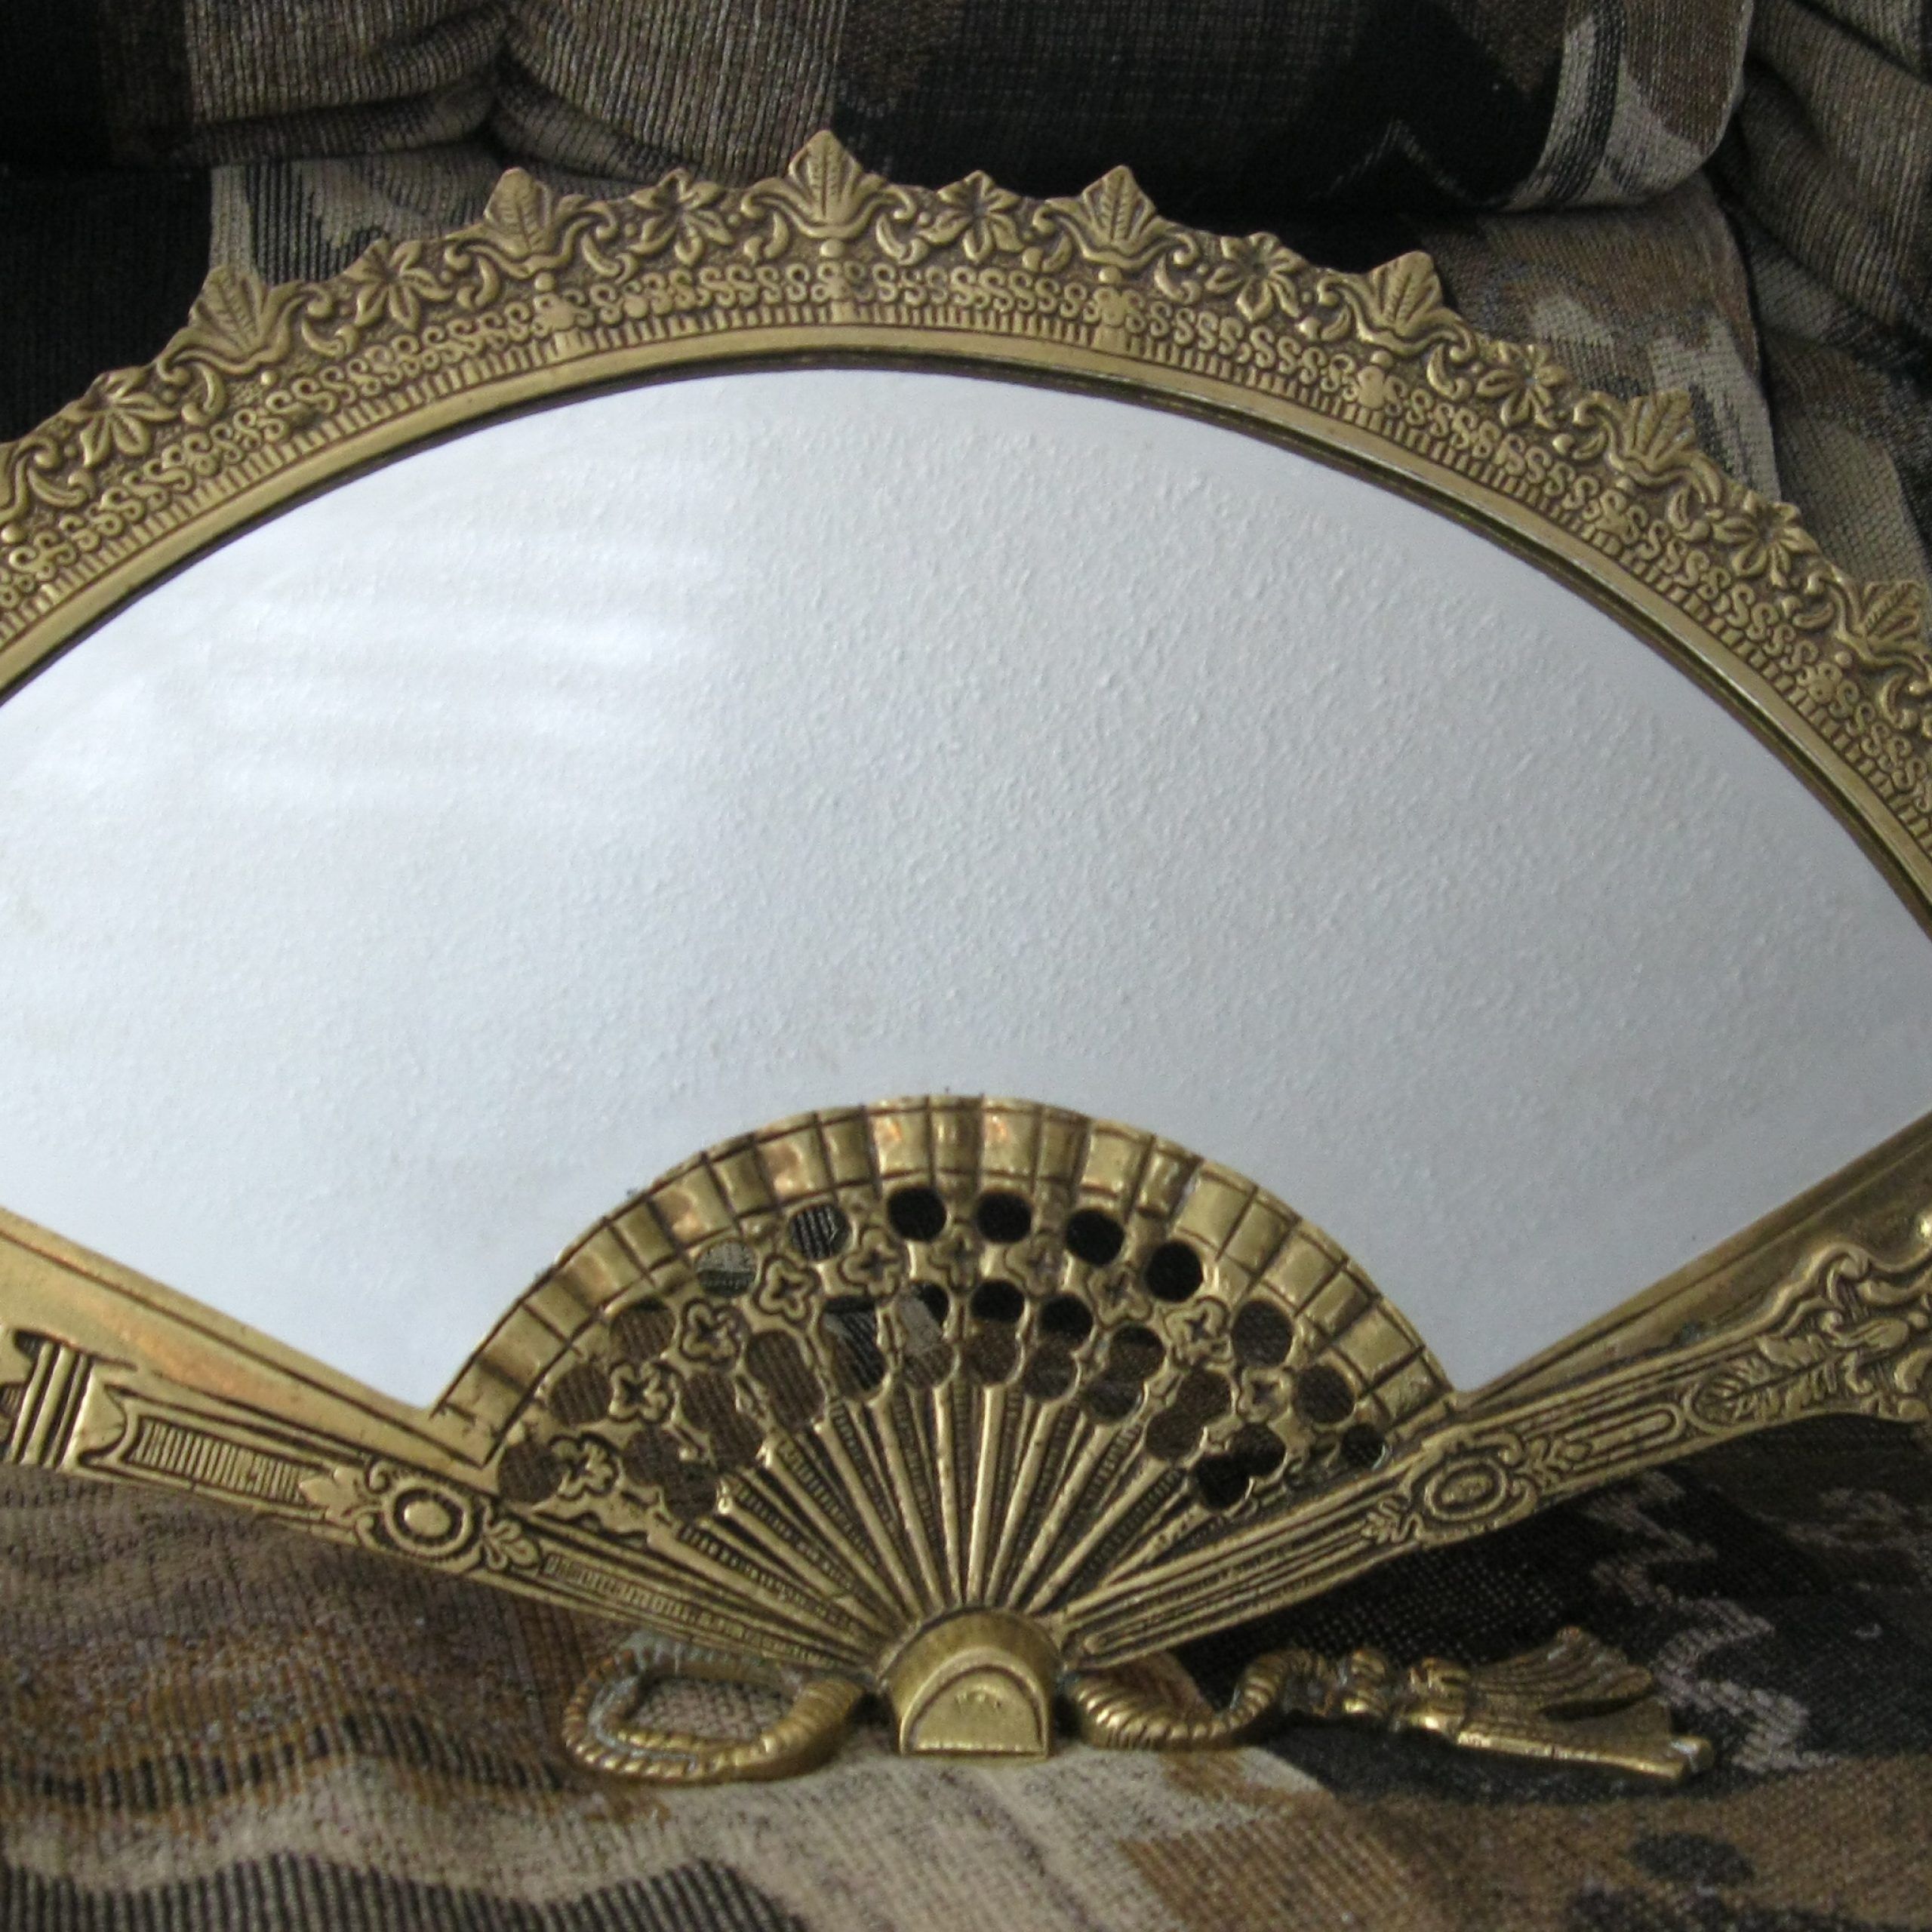 Antique Victorian Solid Brass Fan Mirror Antique Appraisal | Instappraisal Intended For Antique Brass Standing Mirrors (View 3 of 15)